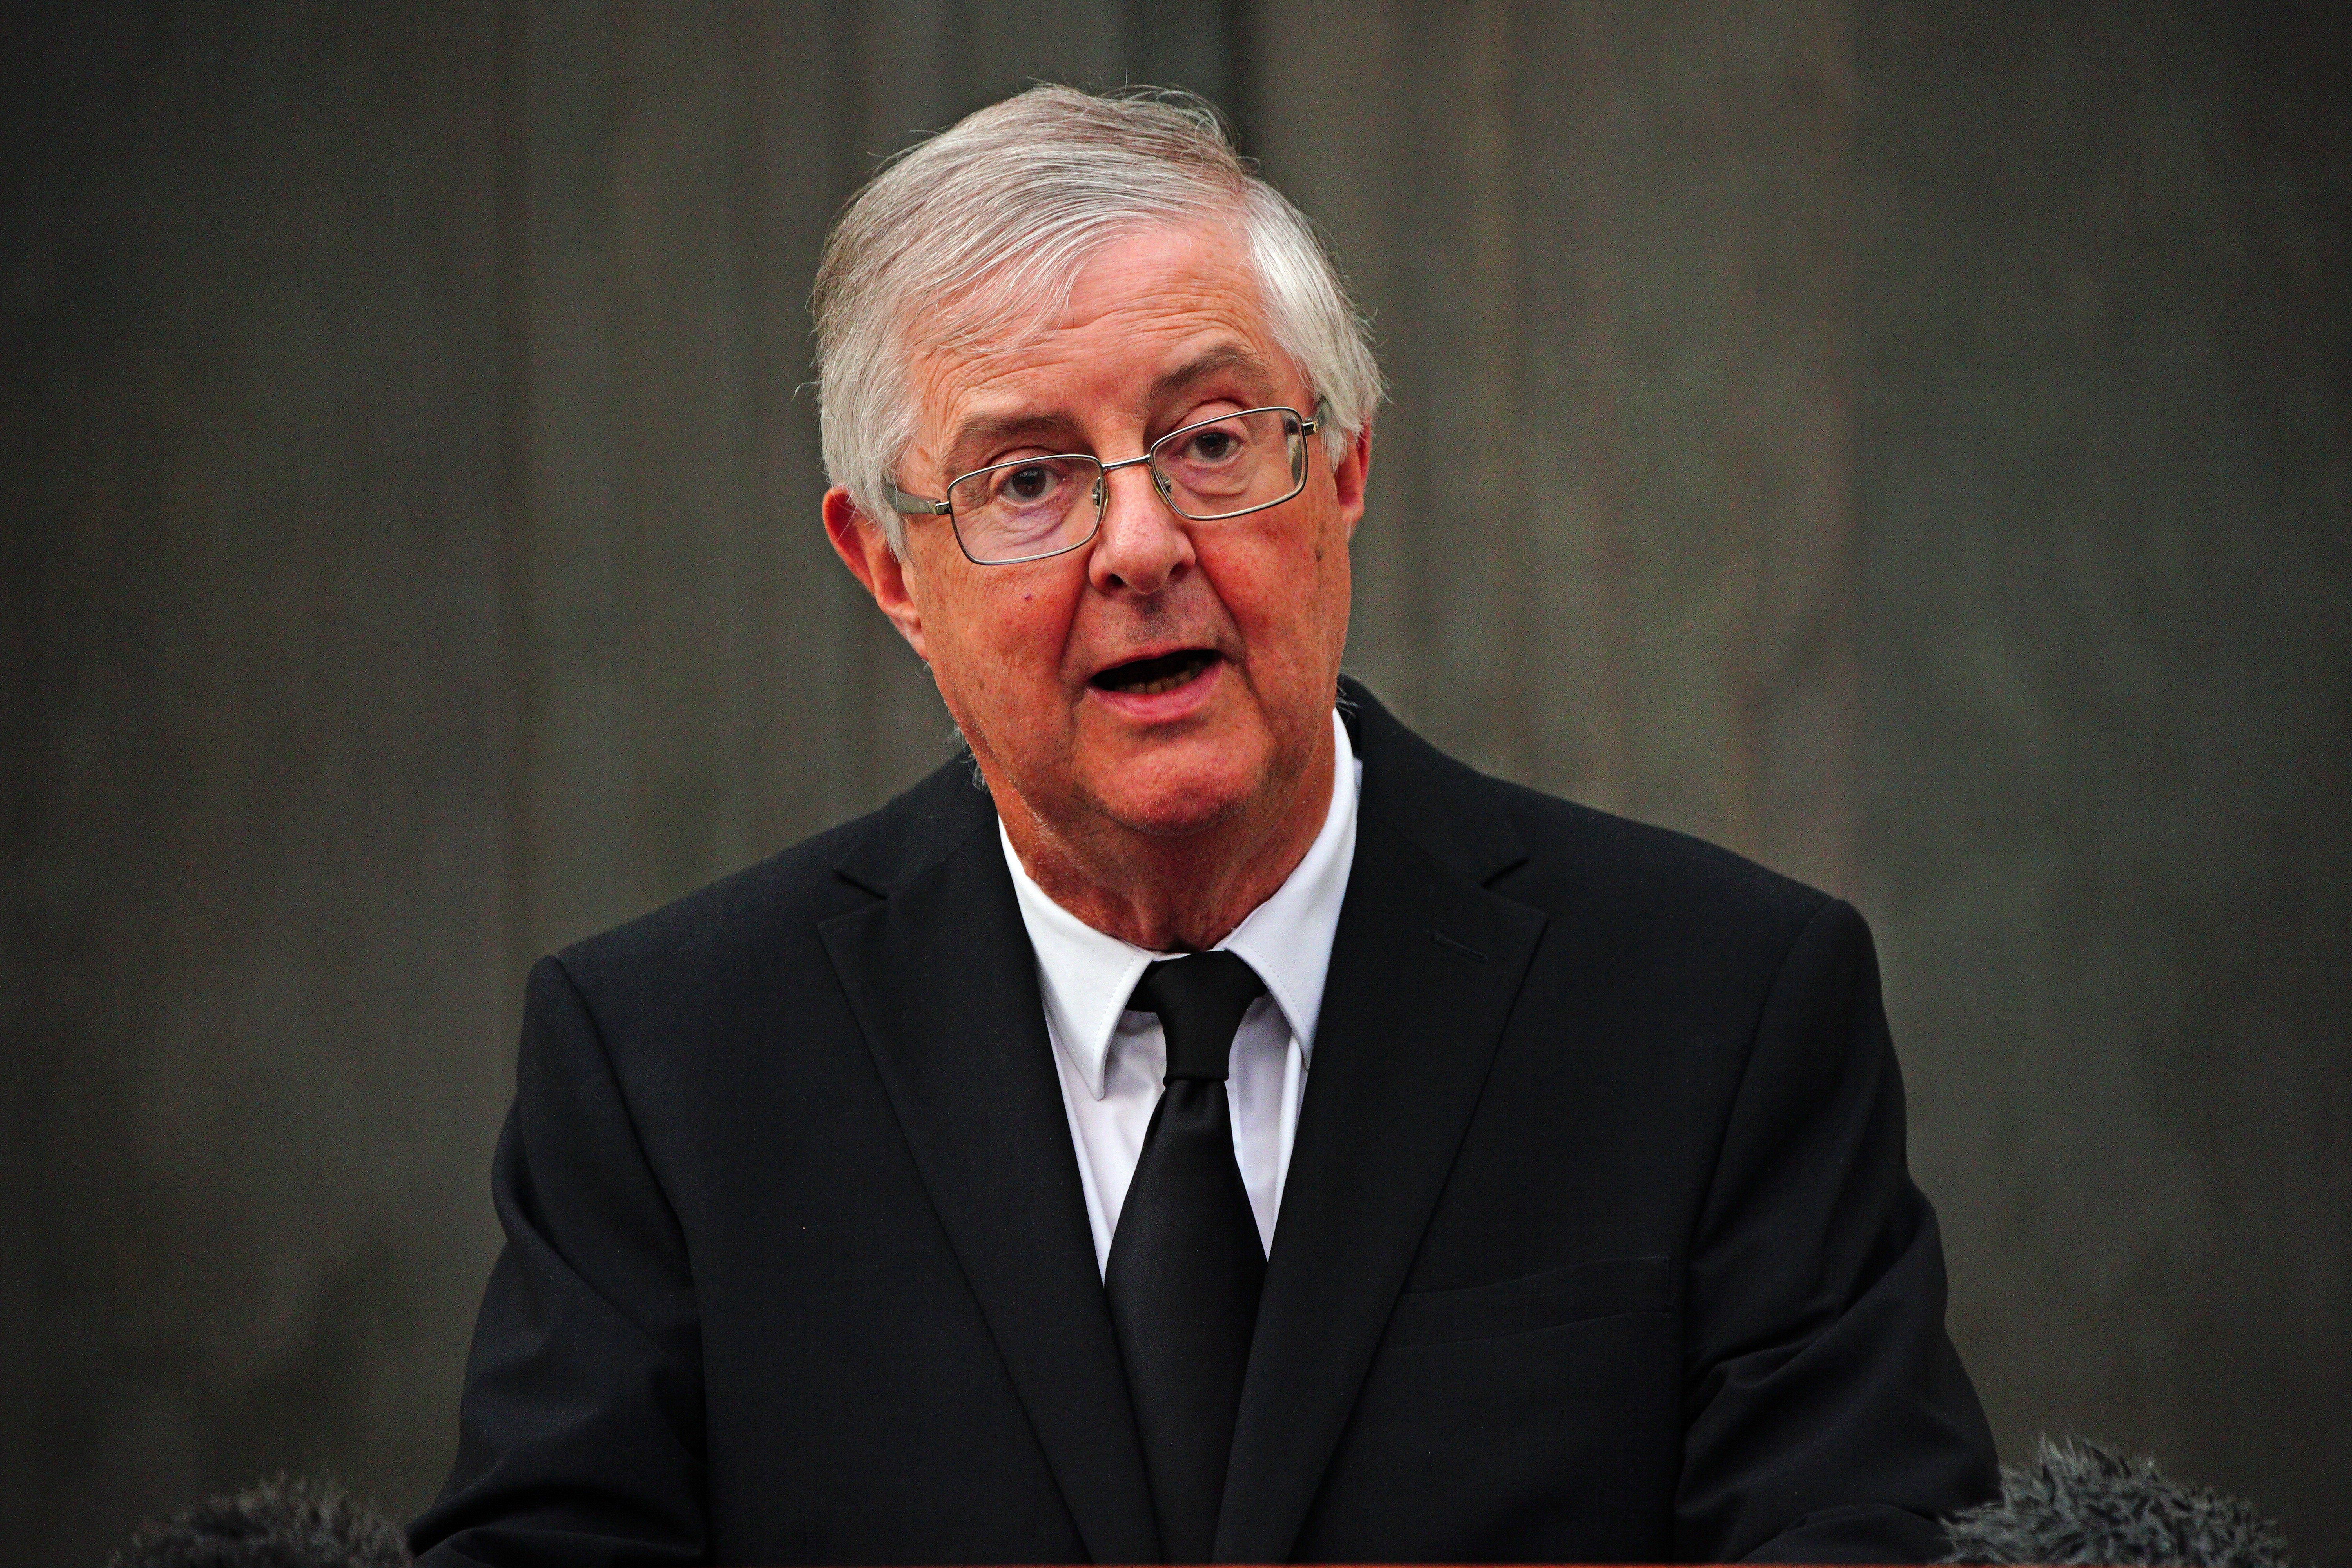 First Minister of Wales Mark Drakeford reads a statement outside the Senedd in Cardiff Bay, Wales, following the announcement of the death of Queen Elizabeth II (Ben Birchall/PA)